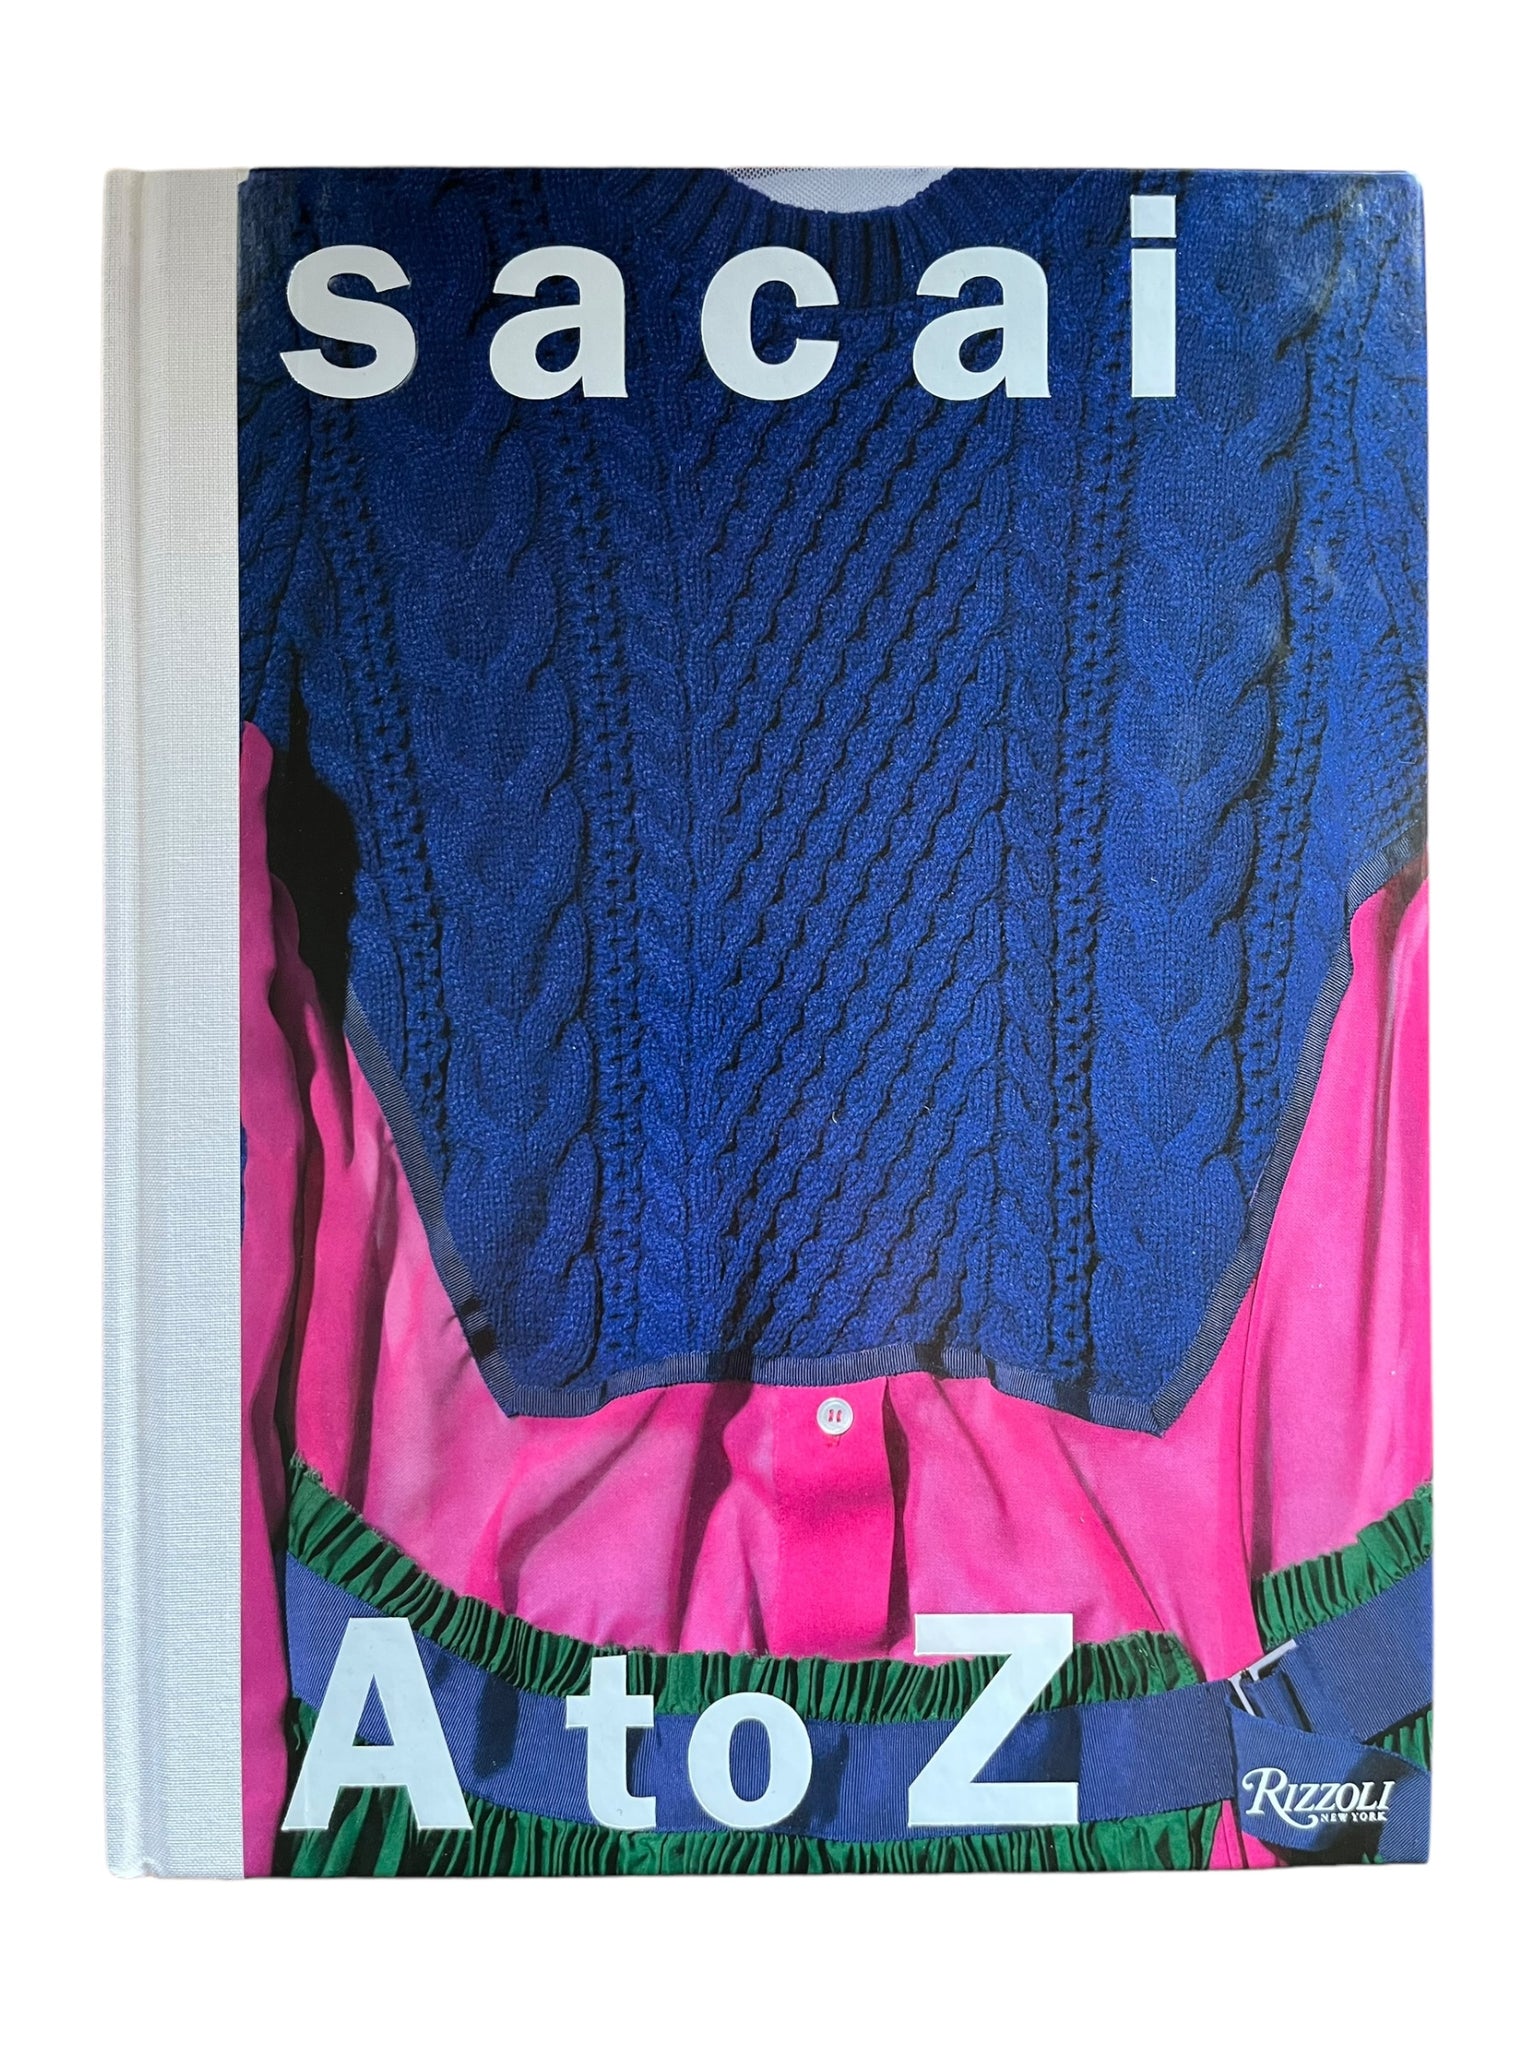 SACAI A to Z - アート・デザイン・音楽